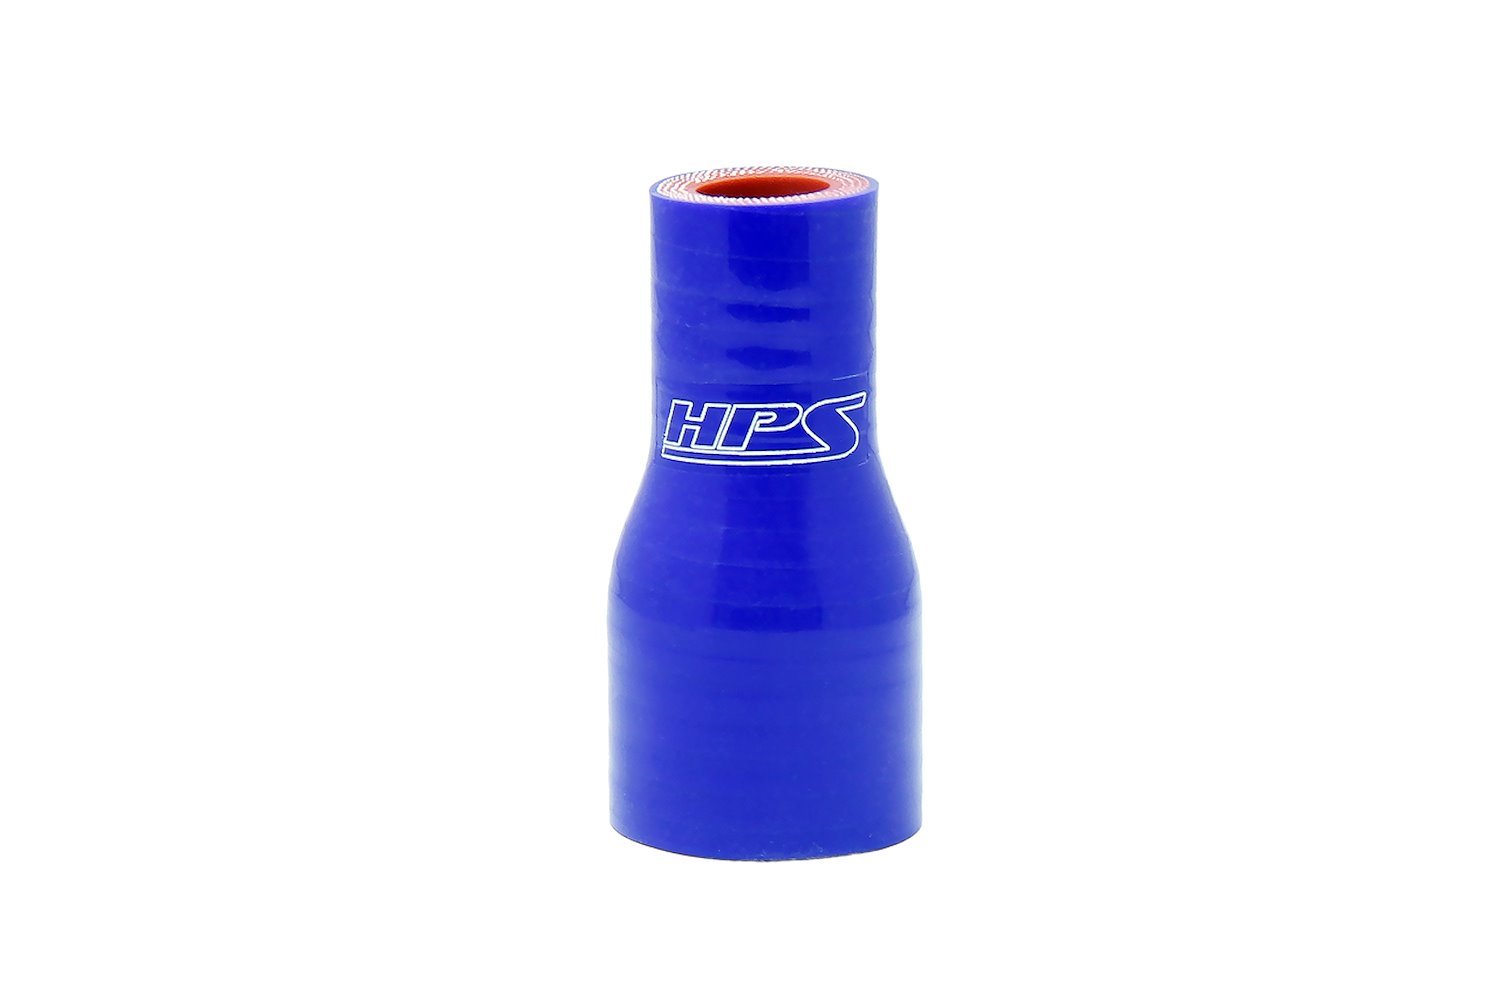 HTSR-075-087-BLUE Silicone Reducer Hose, High-Temp 4-Ply Reinforced, 3/4 in. - 7/8 in. ID, 3 in. Long, Blue